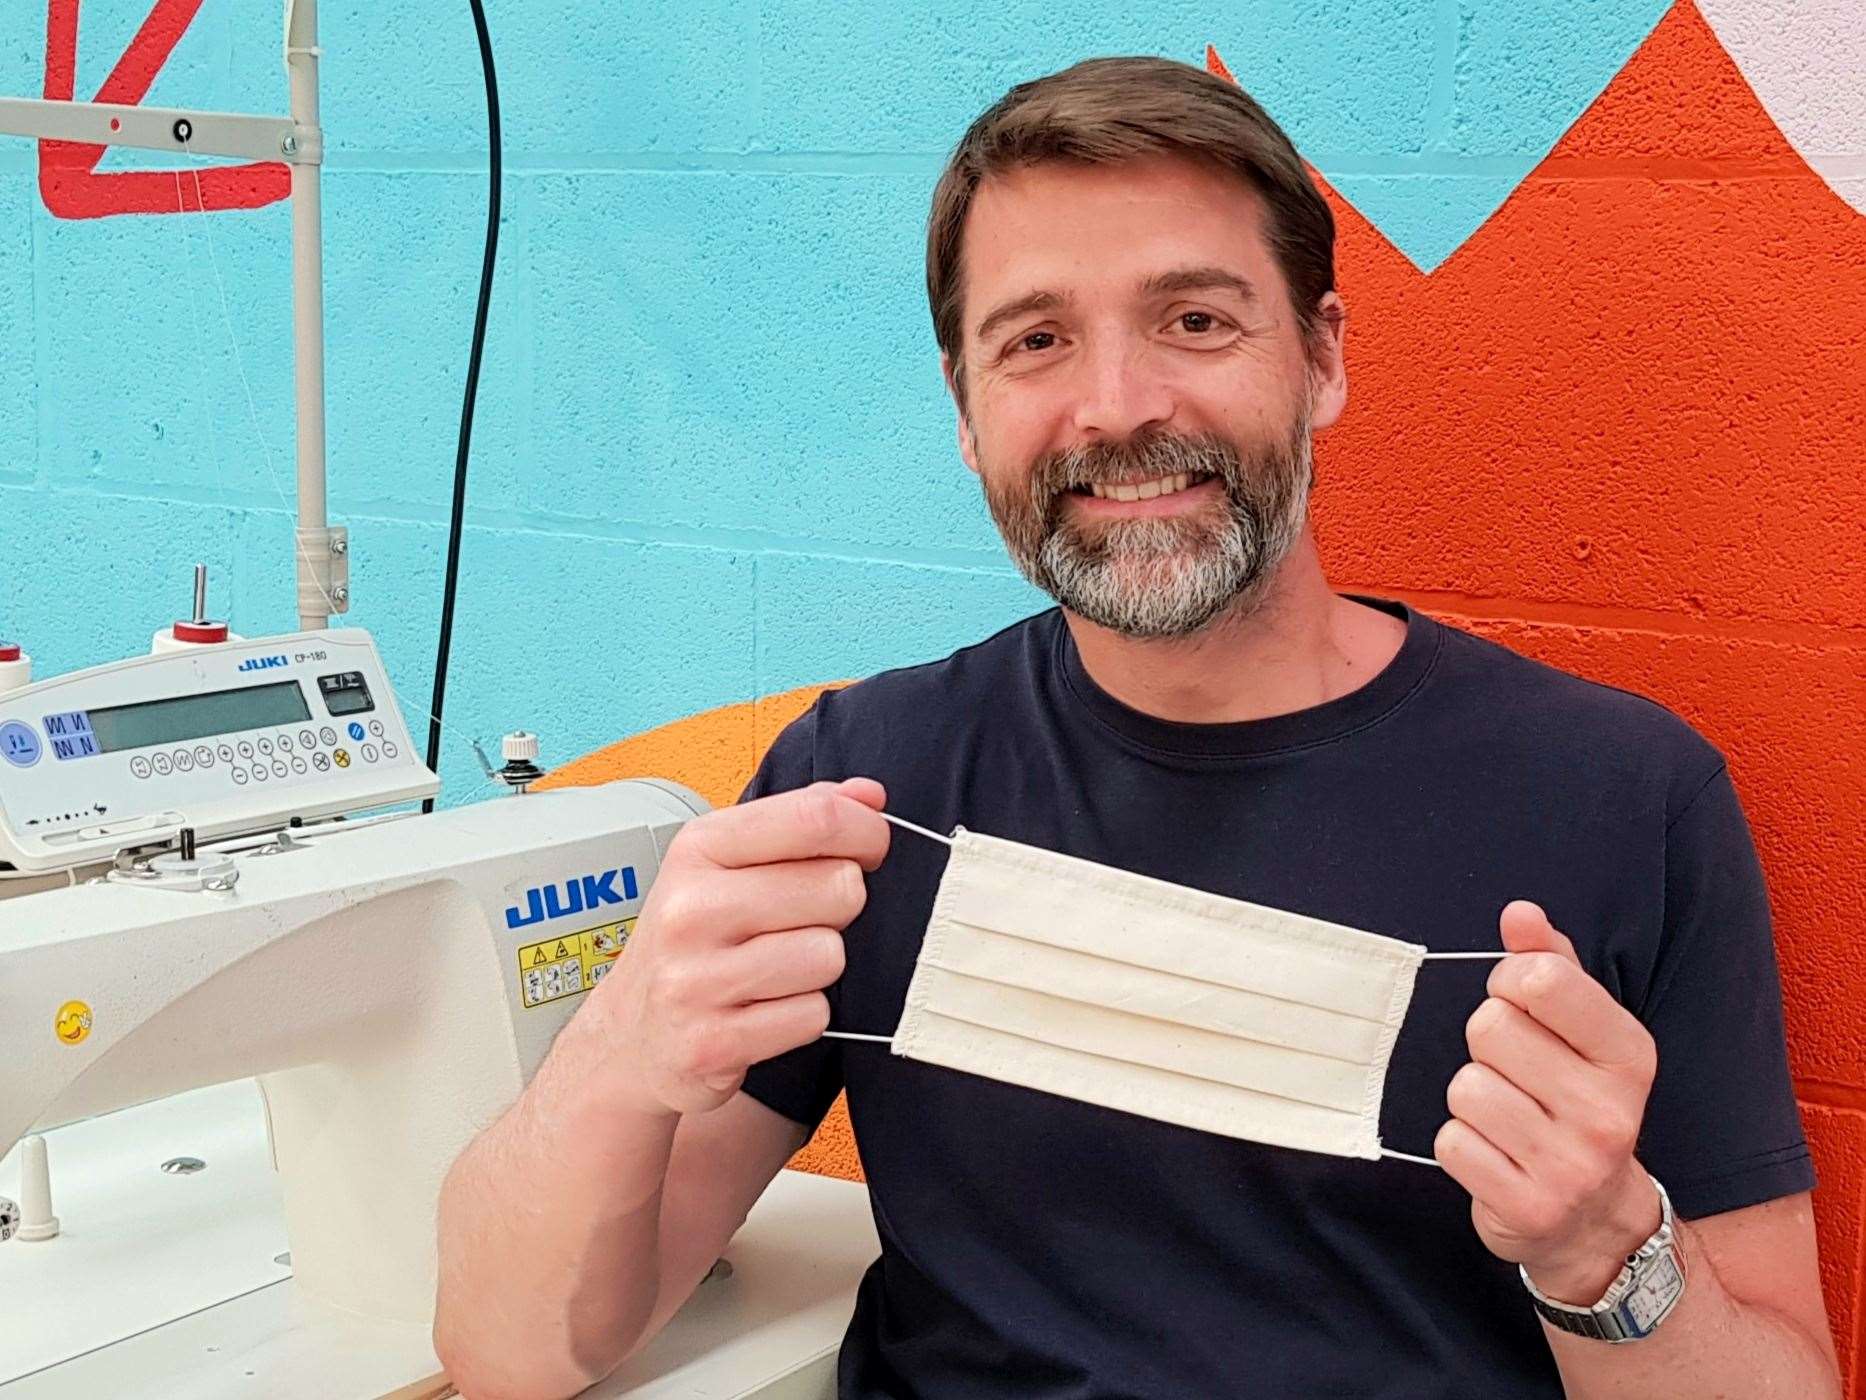 Patrick Grant: sew you want a revolution?